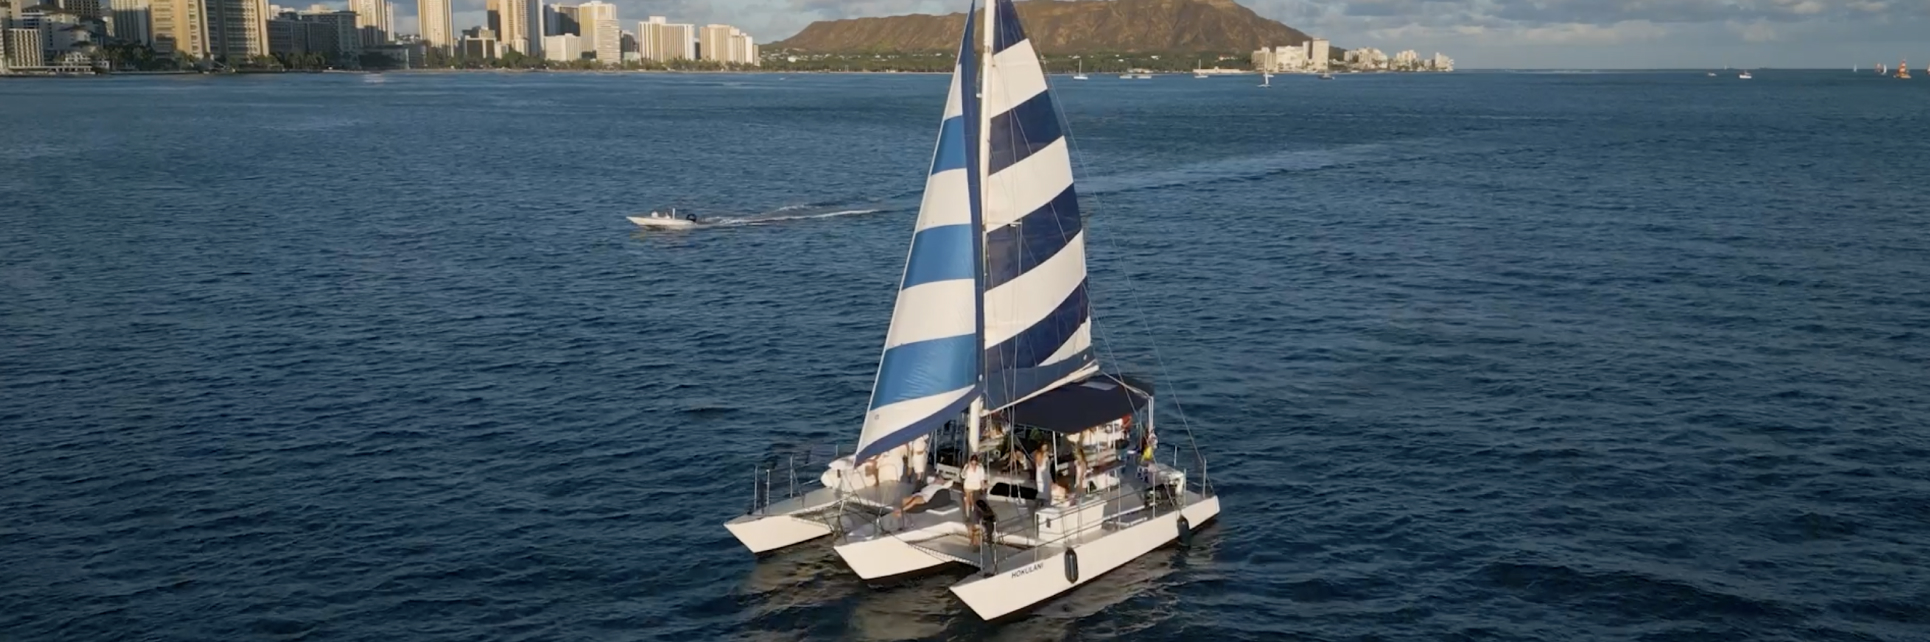 private charter an unforgettable hawaiian experience